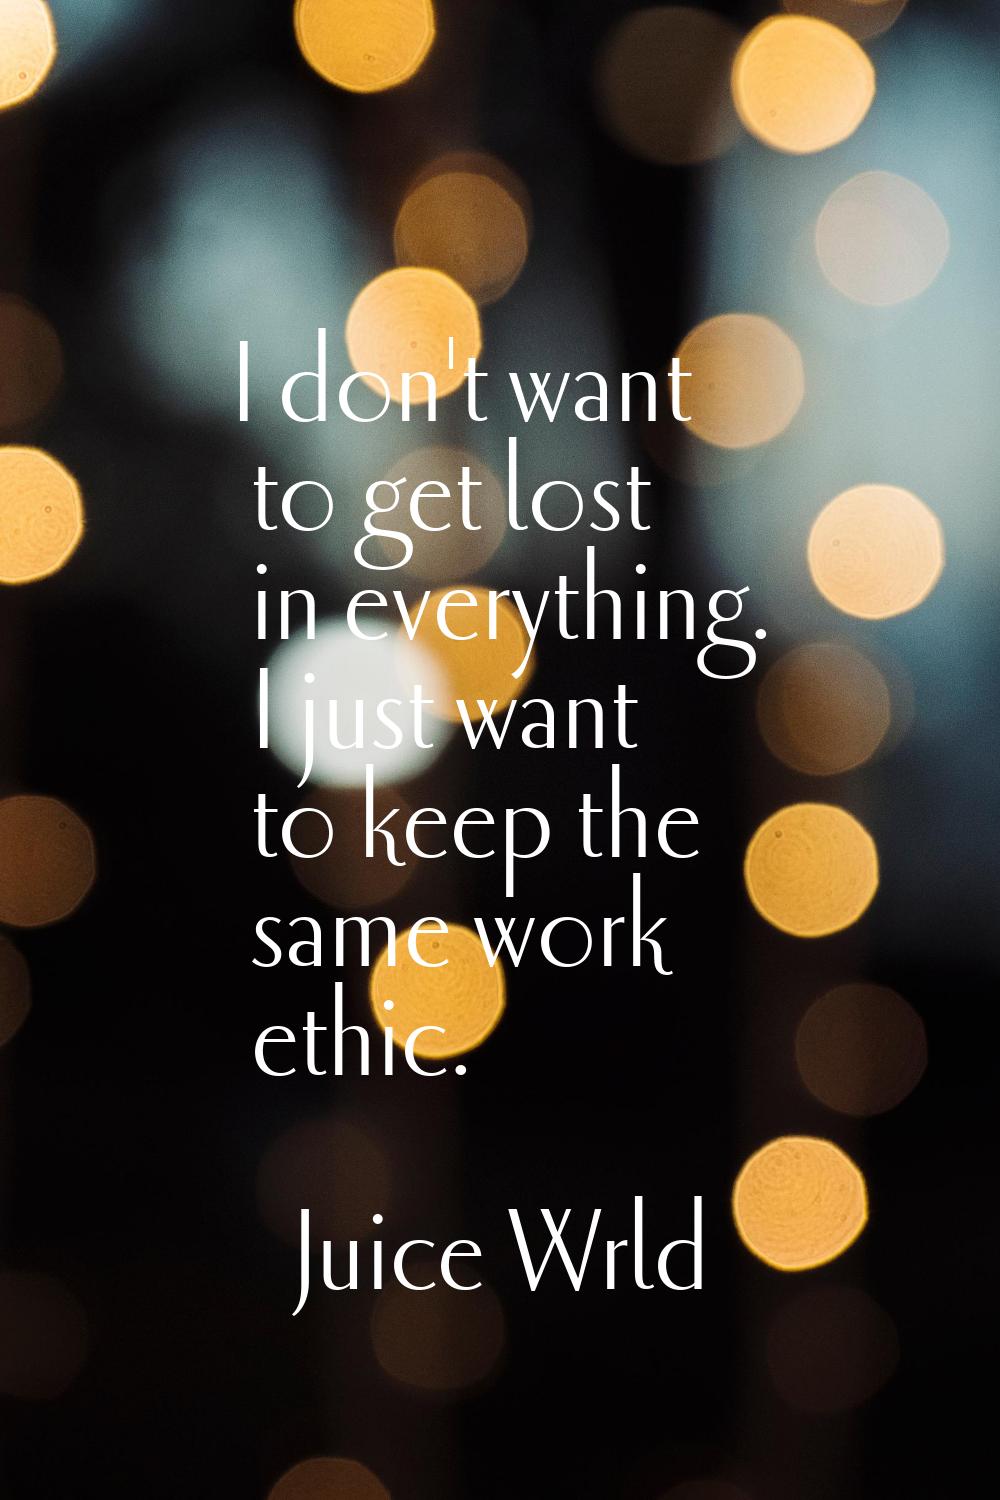 I don't want to get lost in everything. I just want to keep the same work ethic.